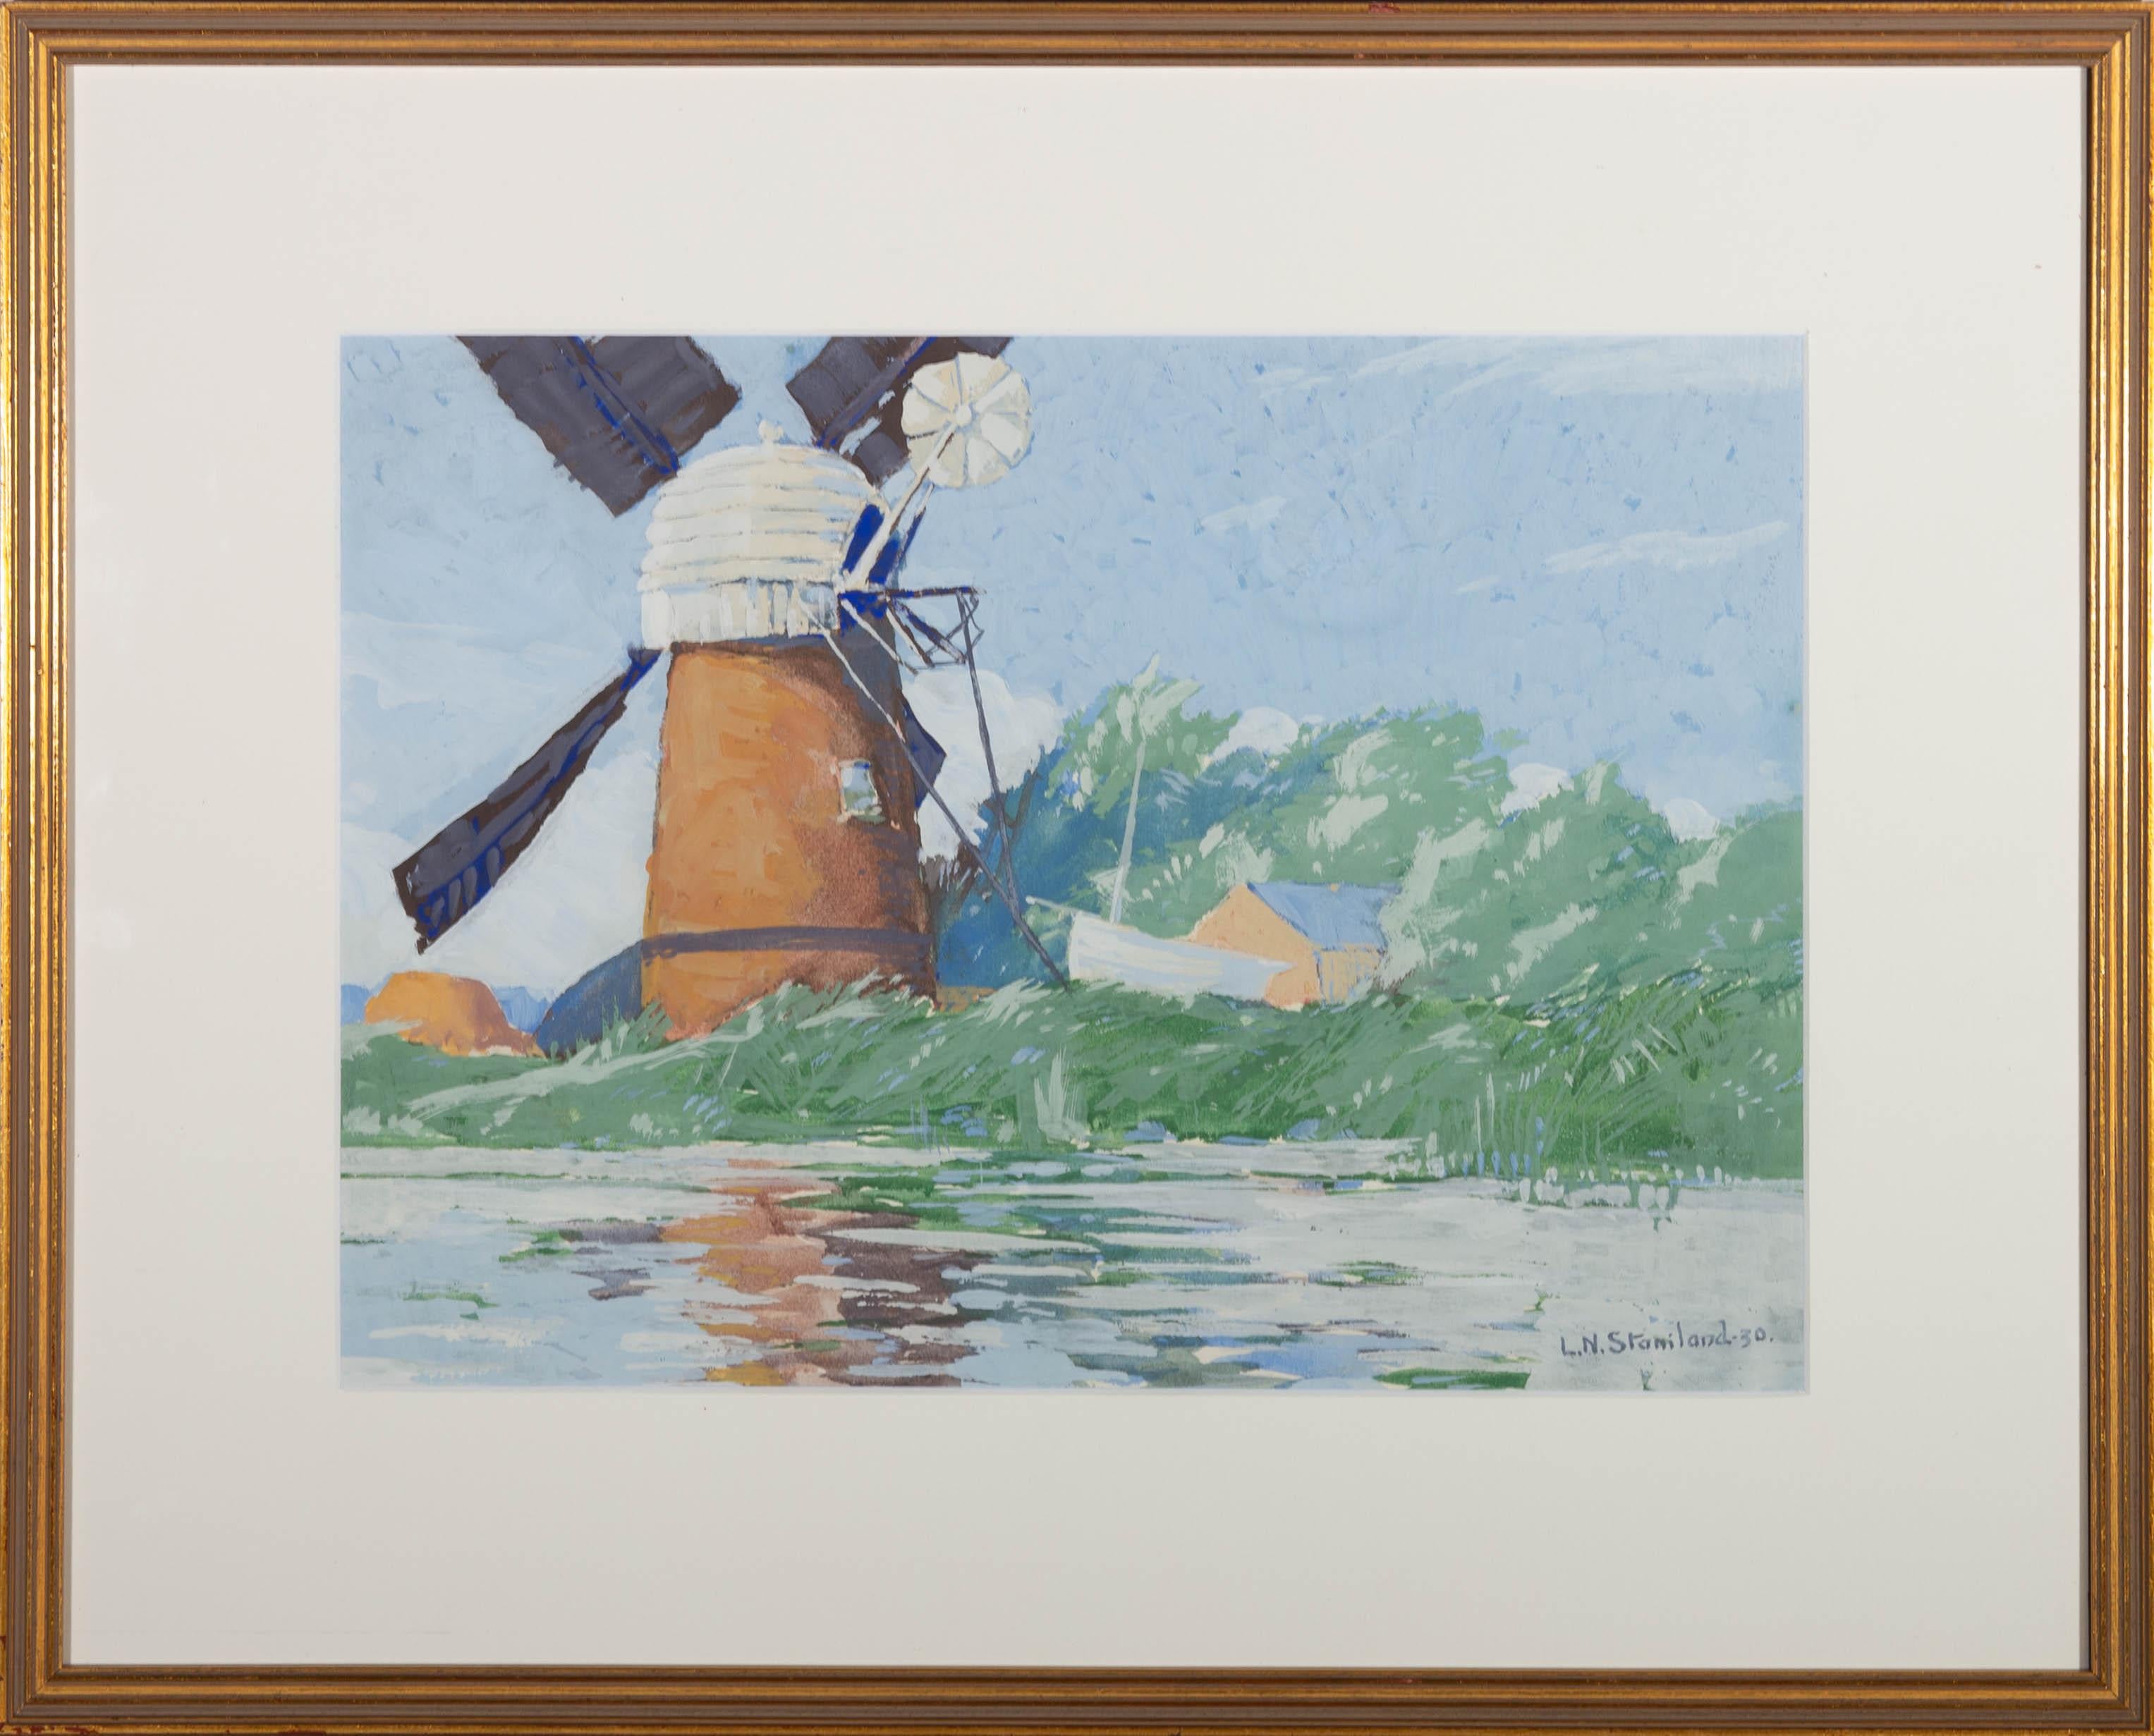 A charming gouache depiction of a windmill on the river on a delightfully bright day. we can see the artist has used impressionistic strokes to create the reflection of the windmill in the water. Signed and dated to the lower right and the work has